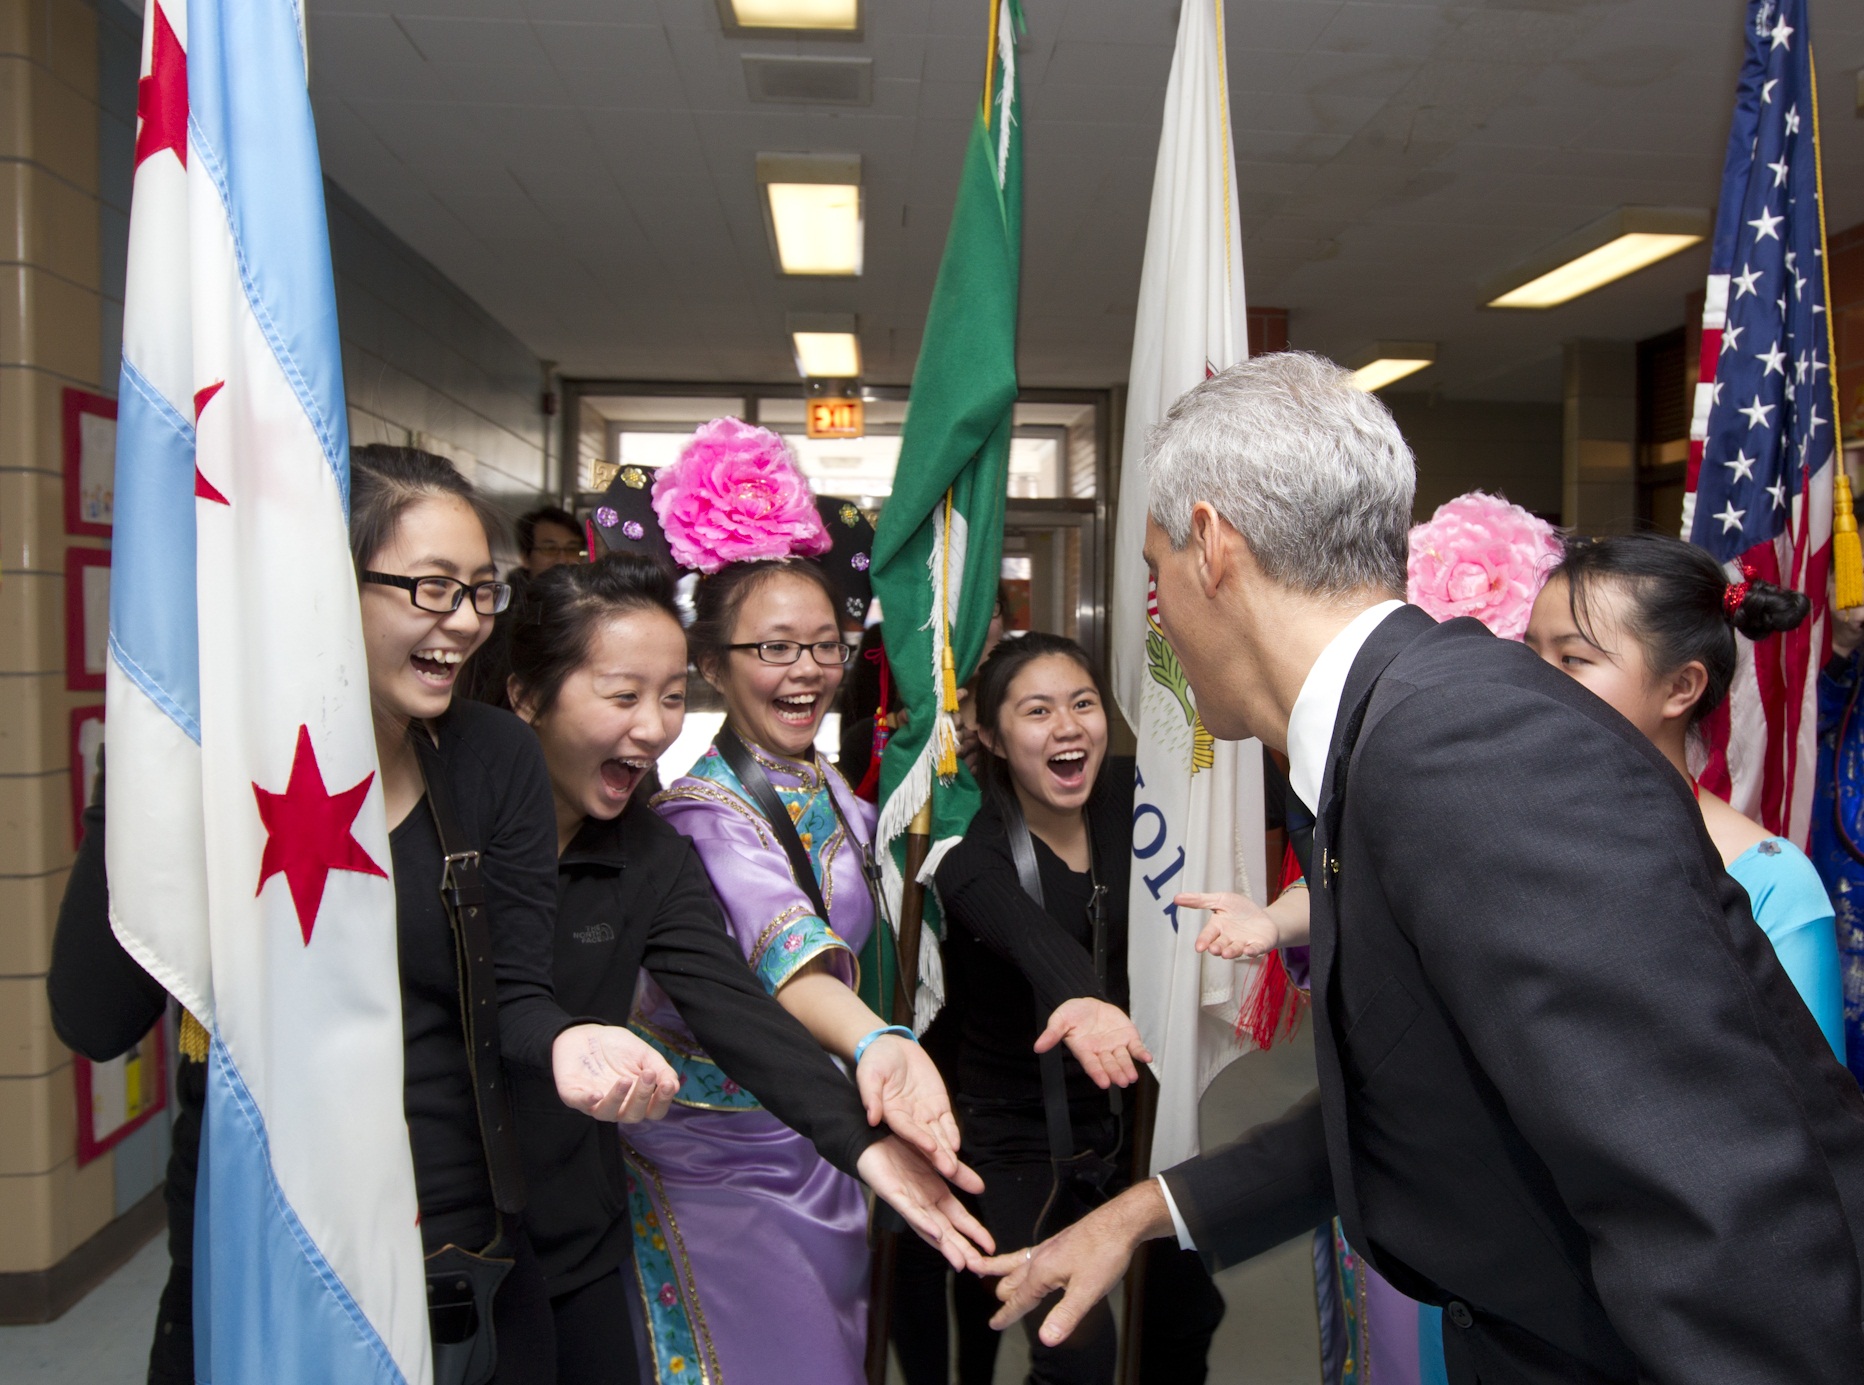 Mayor Emanuel joins community members and students from Robert Healy Elementary School to celebrate the Chinese Lunar New Year and bring in the year of the Horse